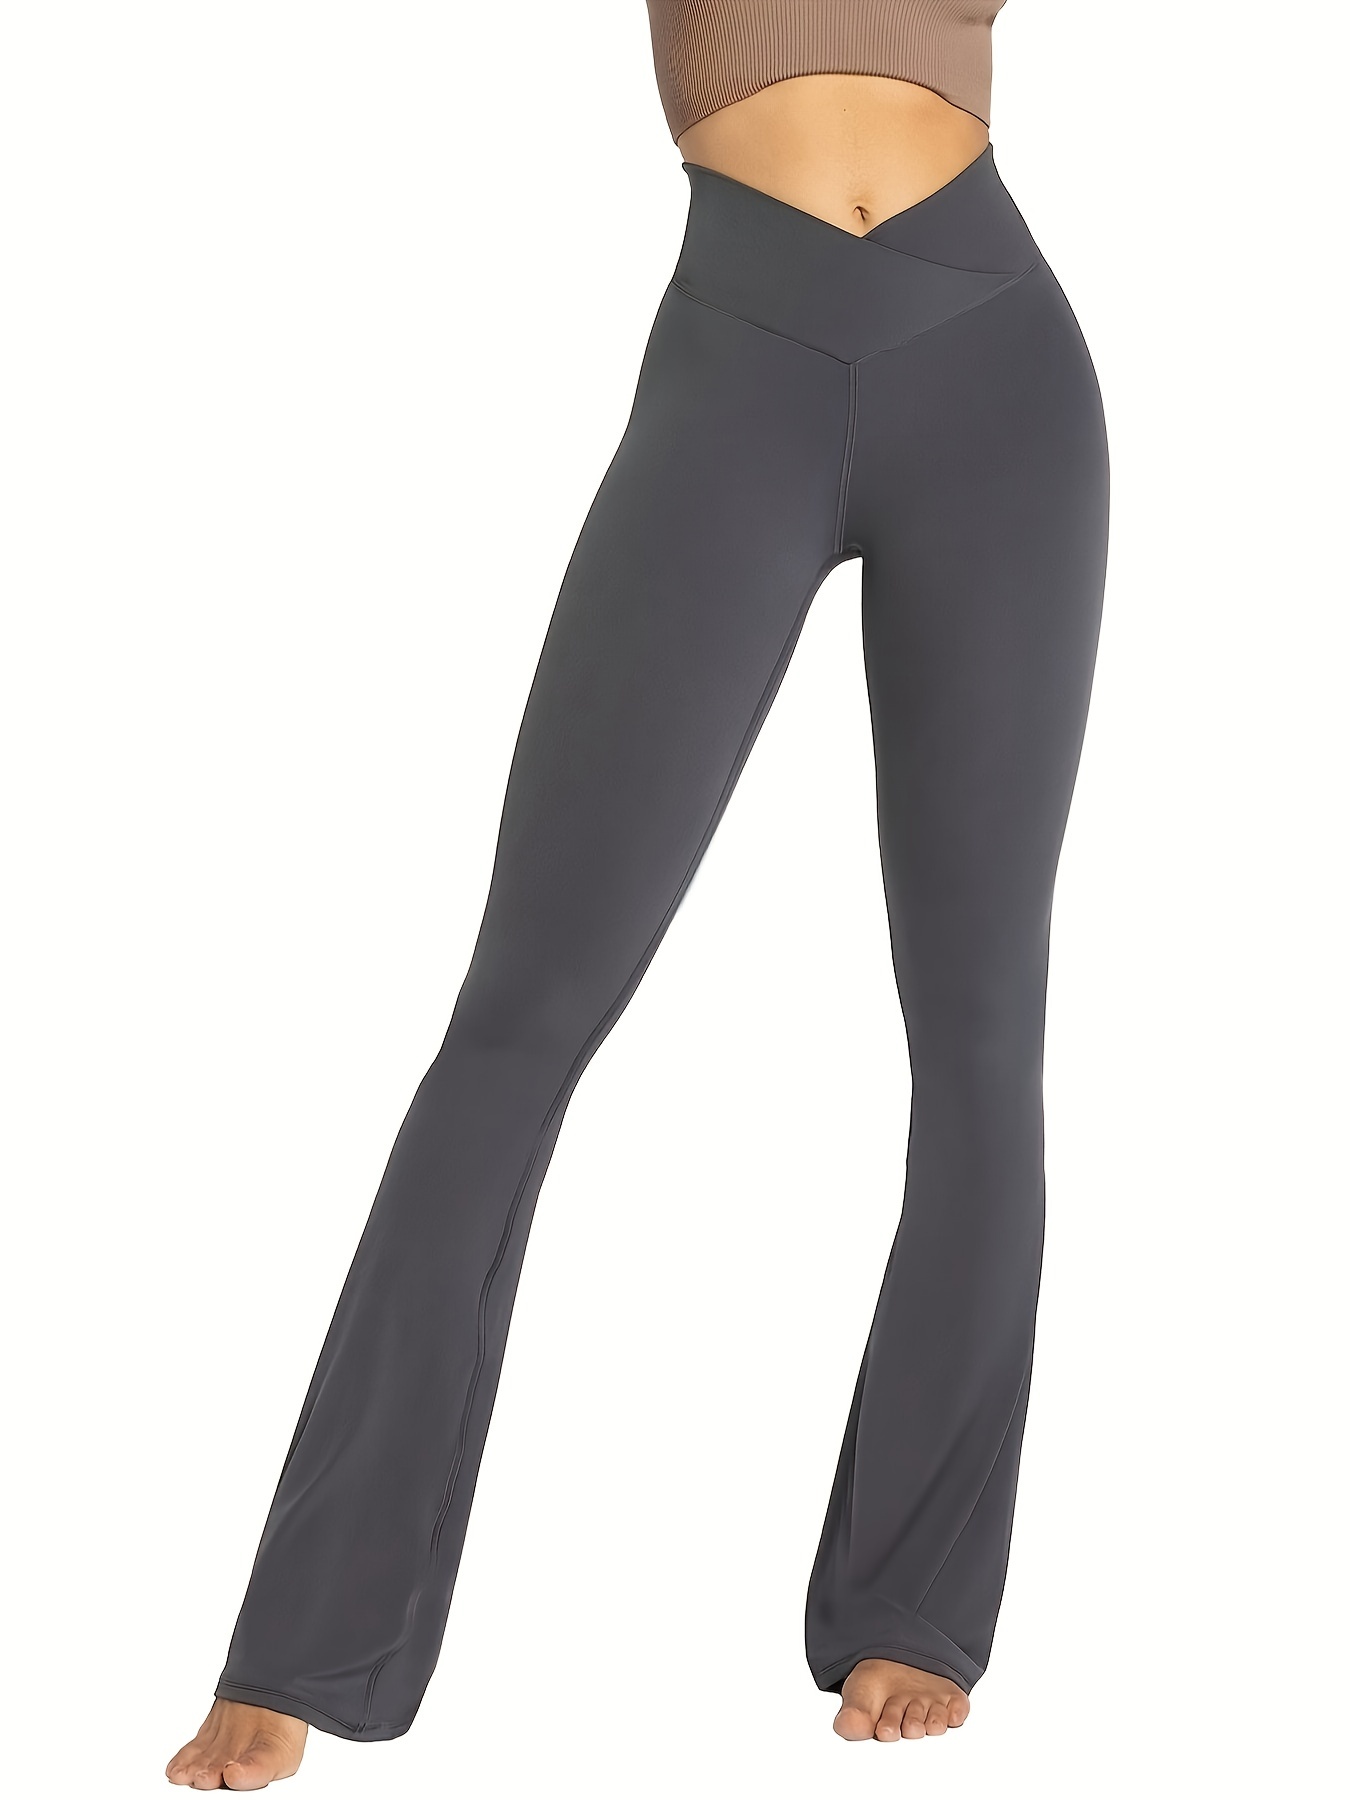 XZNGL All Yoga Pants Womens High Waist Solid Color Tight Fitness